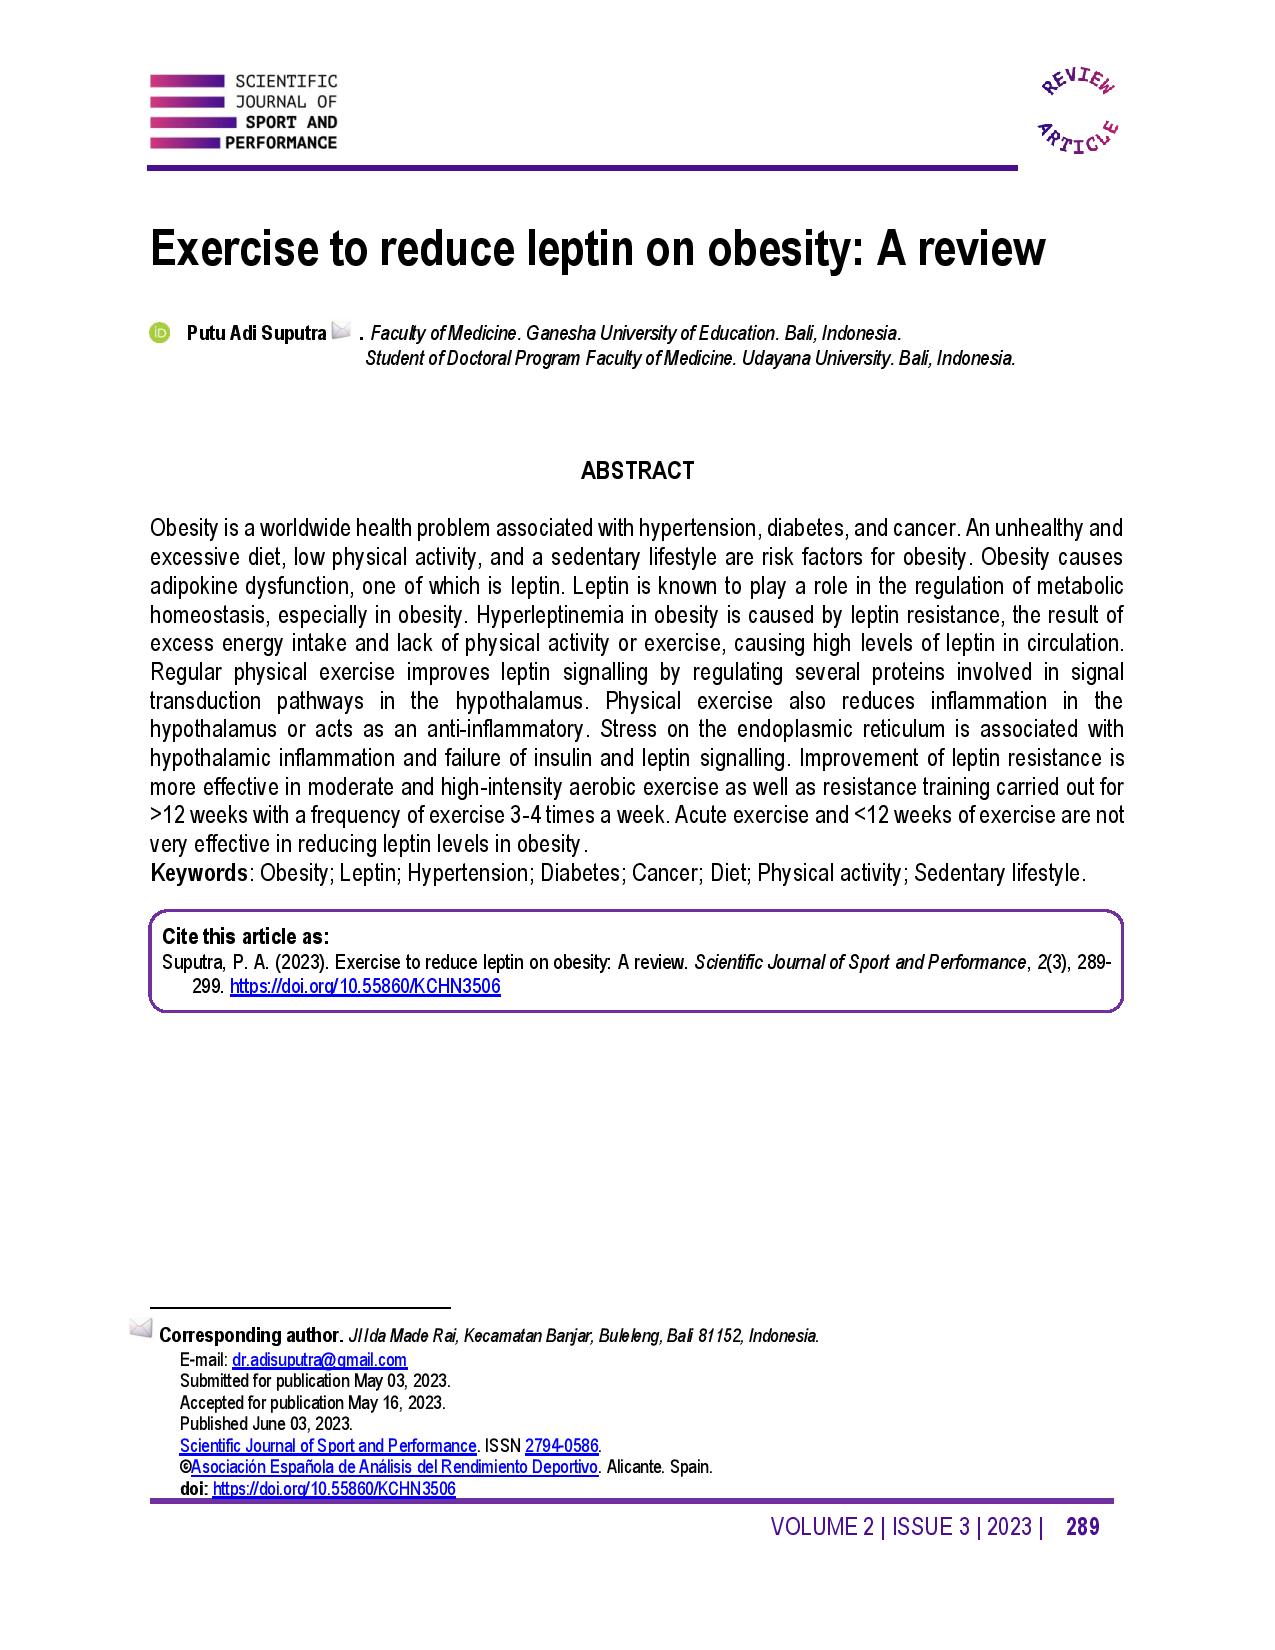 Exercise to reduce leptin on obesity: A review